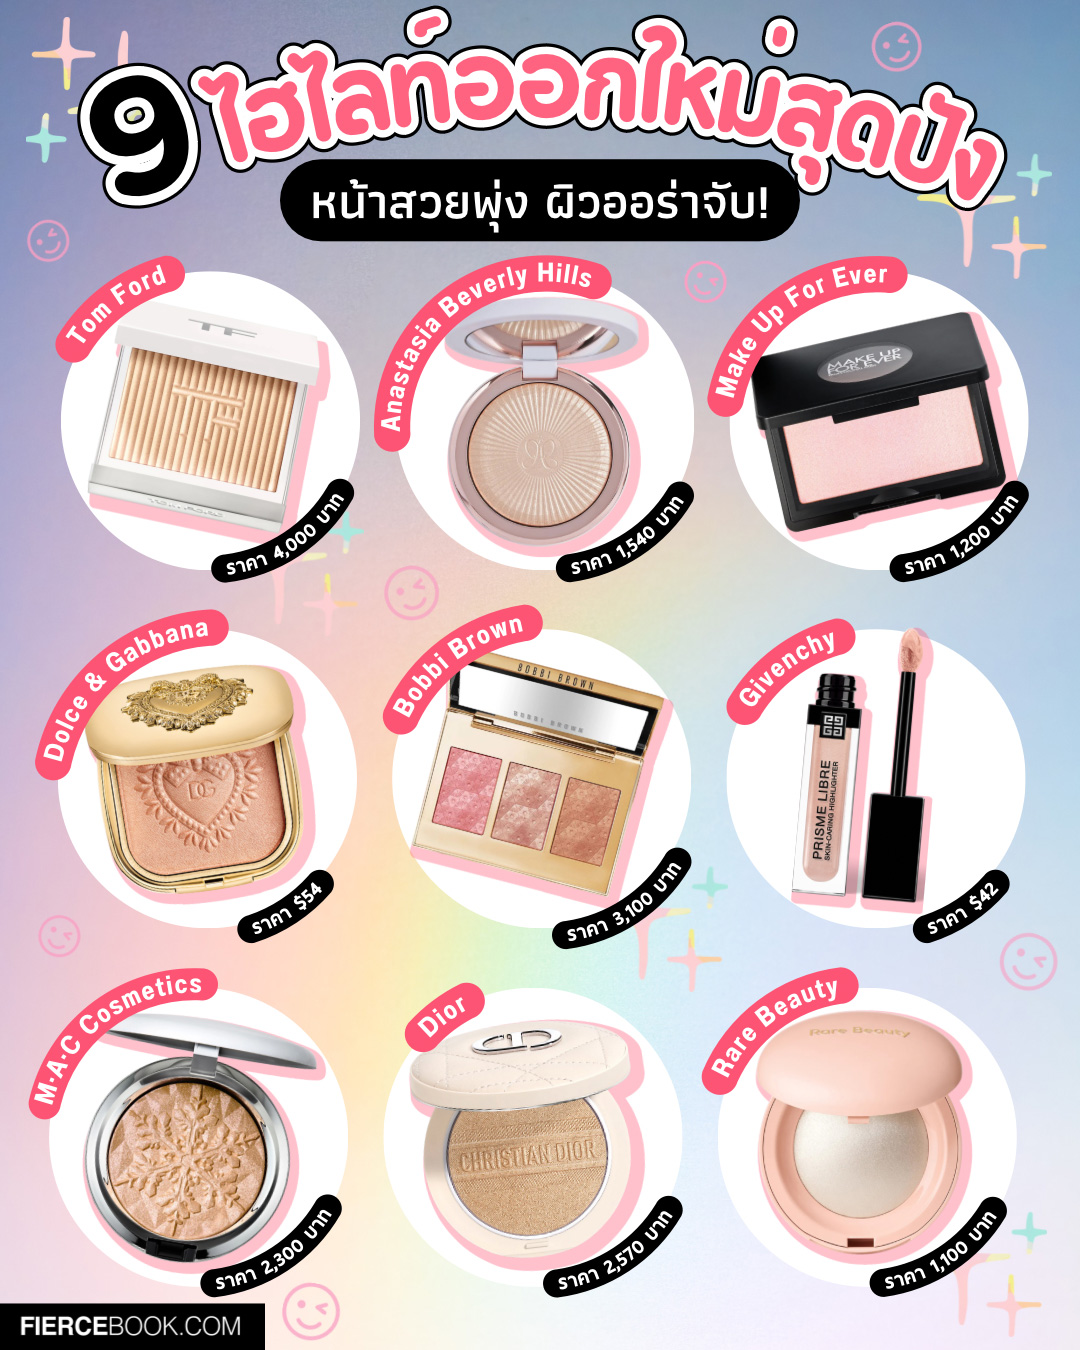 Beauty Items, ไฮไลท์, ออกใหม่, มาใหม่, คอลเลคชั่นใหม่, Holiday 2023, Fall 2023, Winter 2023, งานผิว, โกลวฉ่ำ, หน้าวาว, เล่นแสง, ผิวสวย, ออร่า, Tom Ford Soleil Neige Glow Highlighter, Anastasia Beverly Hills Glow Seeker Highlighter, Make Up For Ever Artist Face Powders Highlighter, Dolce & Gabbana Devotion Illuminating Face Powder, Bobbi Brown Luxe Cheek & Highlighting Palette, Givenchy Prisme Libre Skin-Caring Liquid Highlighter, M·A·C Colour Bizzare Blizzard Extra Dimension Skinfinish, Dior Forever Couture Luminizer, Rare Beauty Positive Light Silky Touch Highlighter